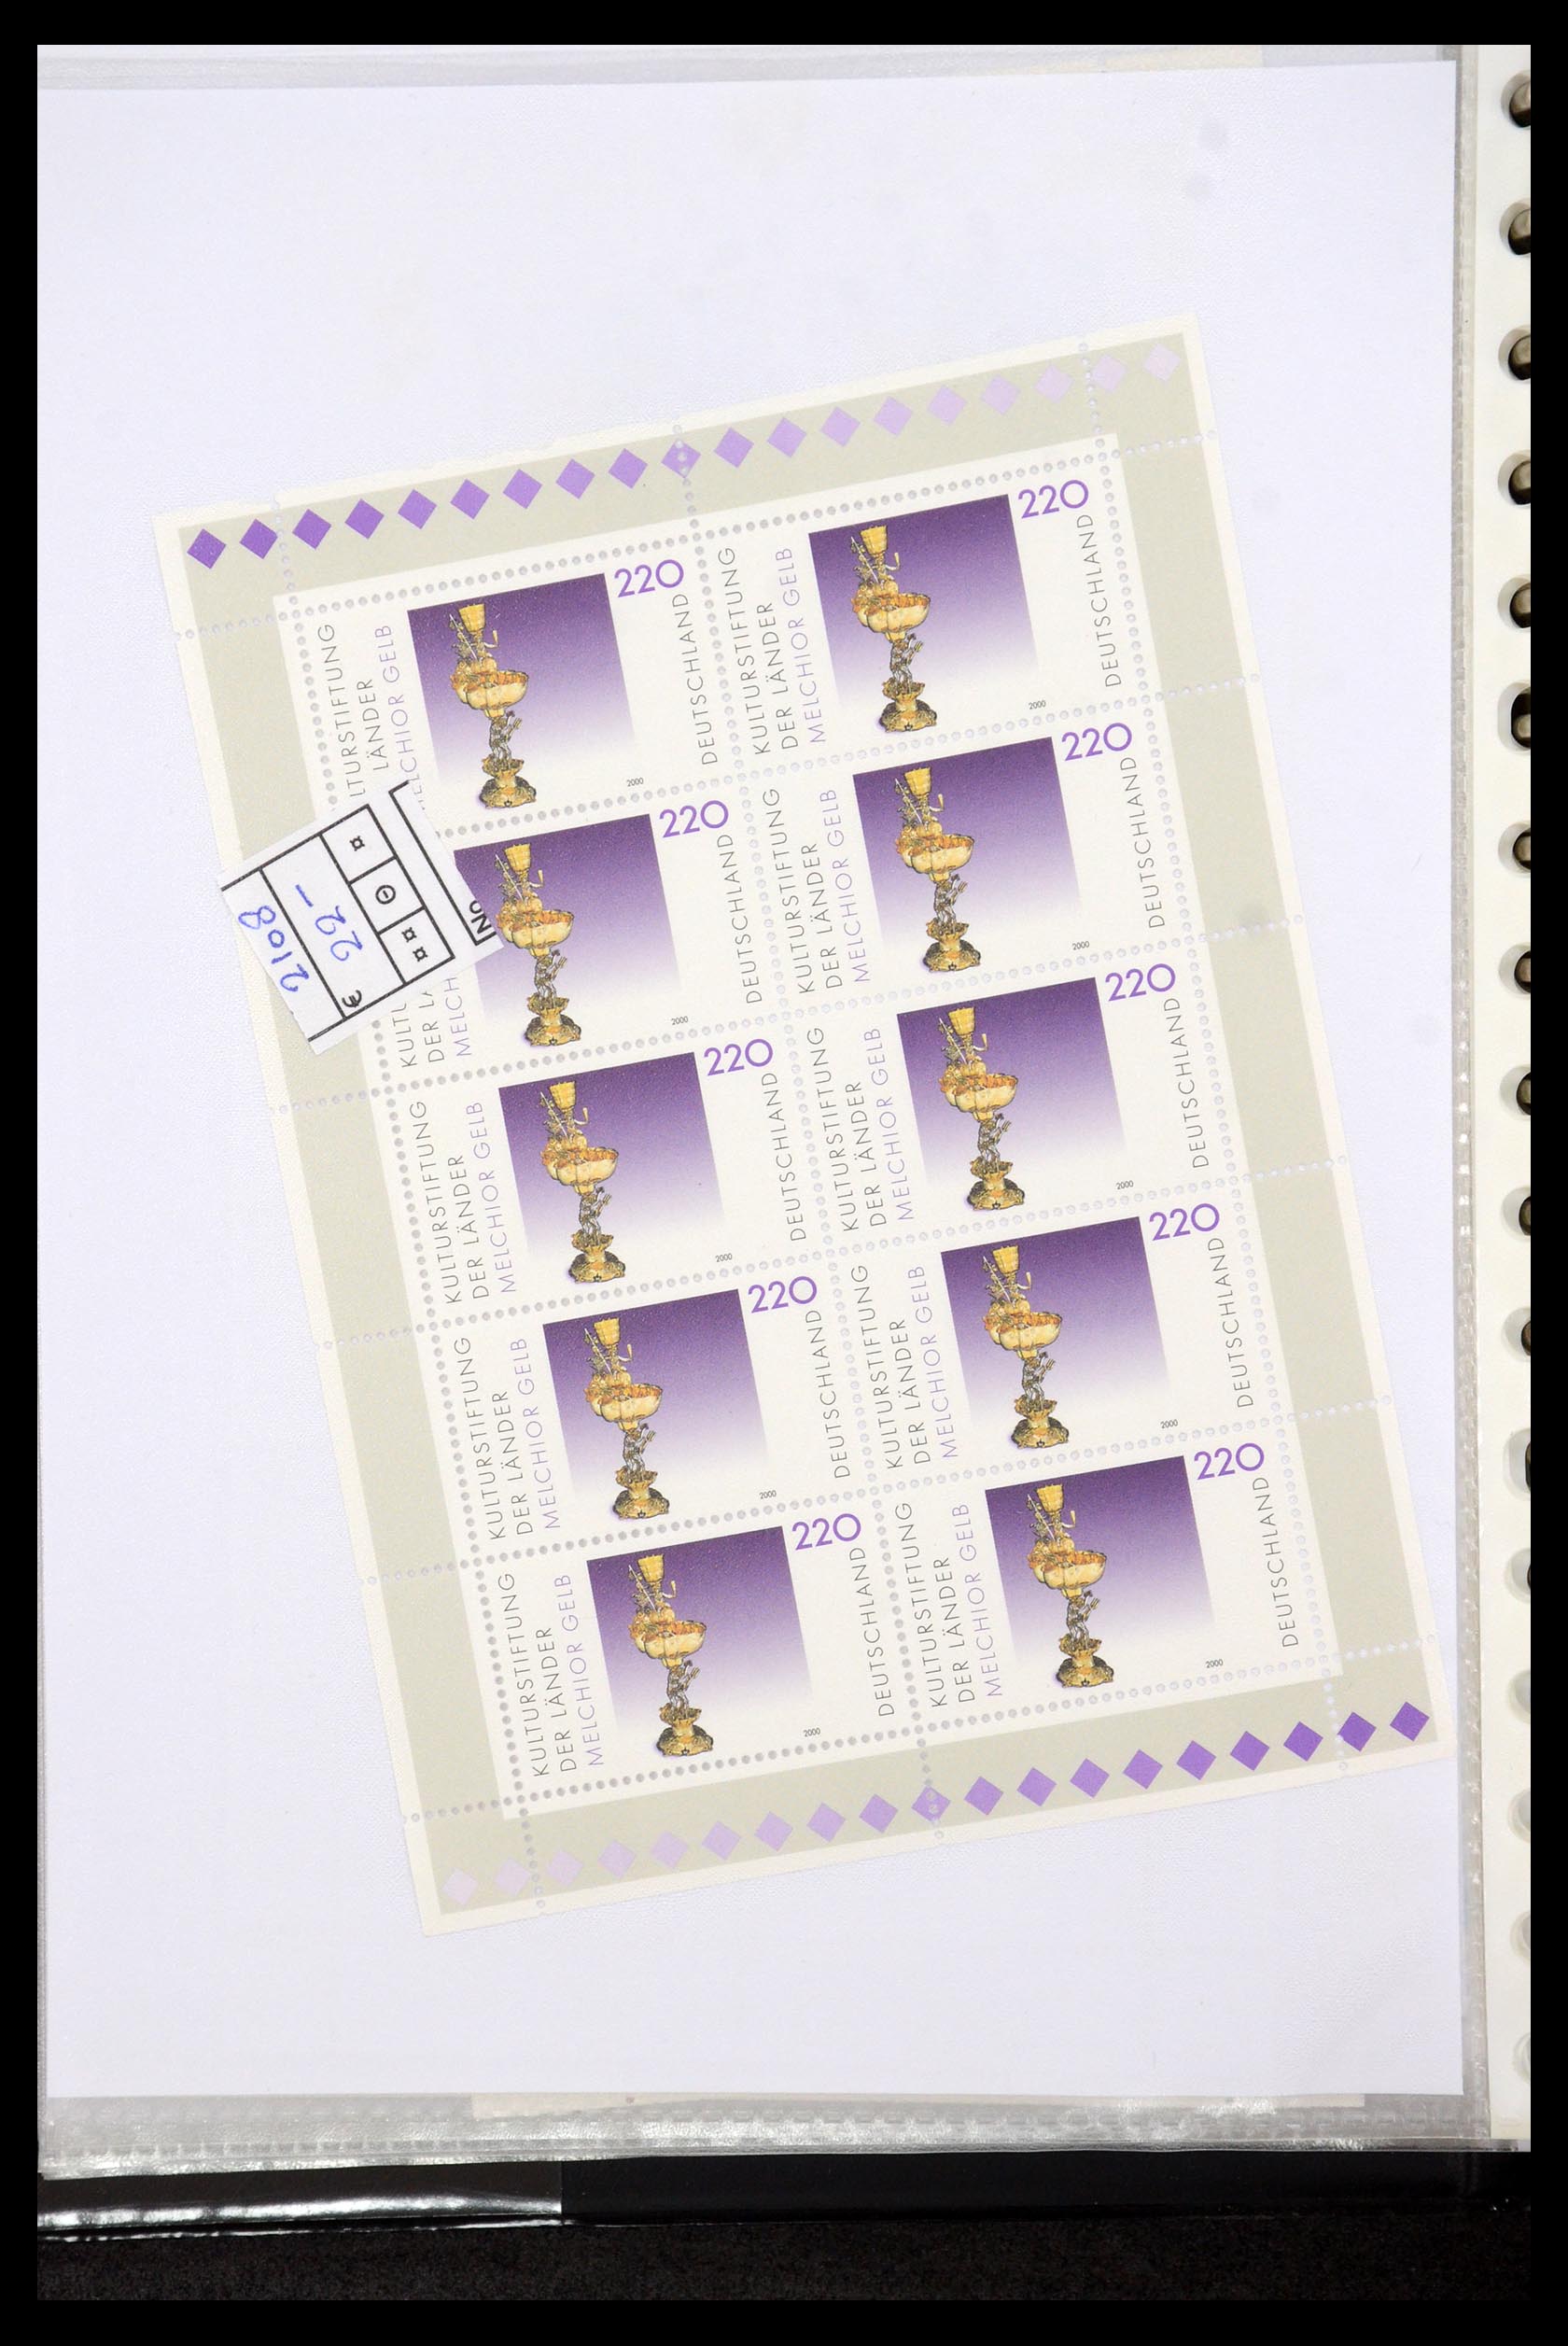 35474 132 - Stamp Collection 35474 Bundespost 1995-2000.